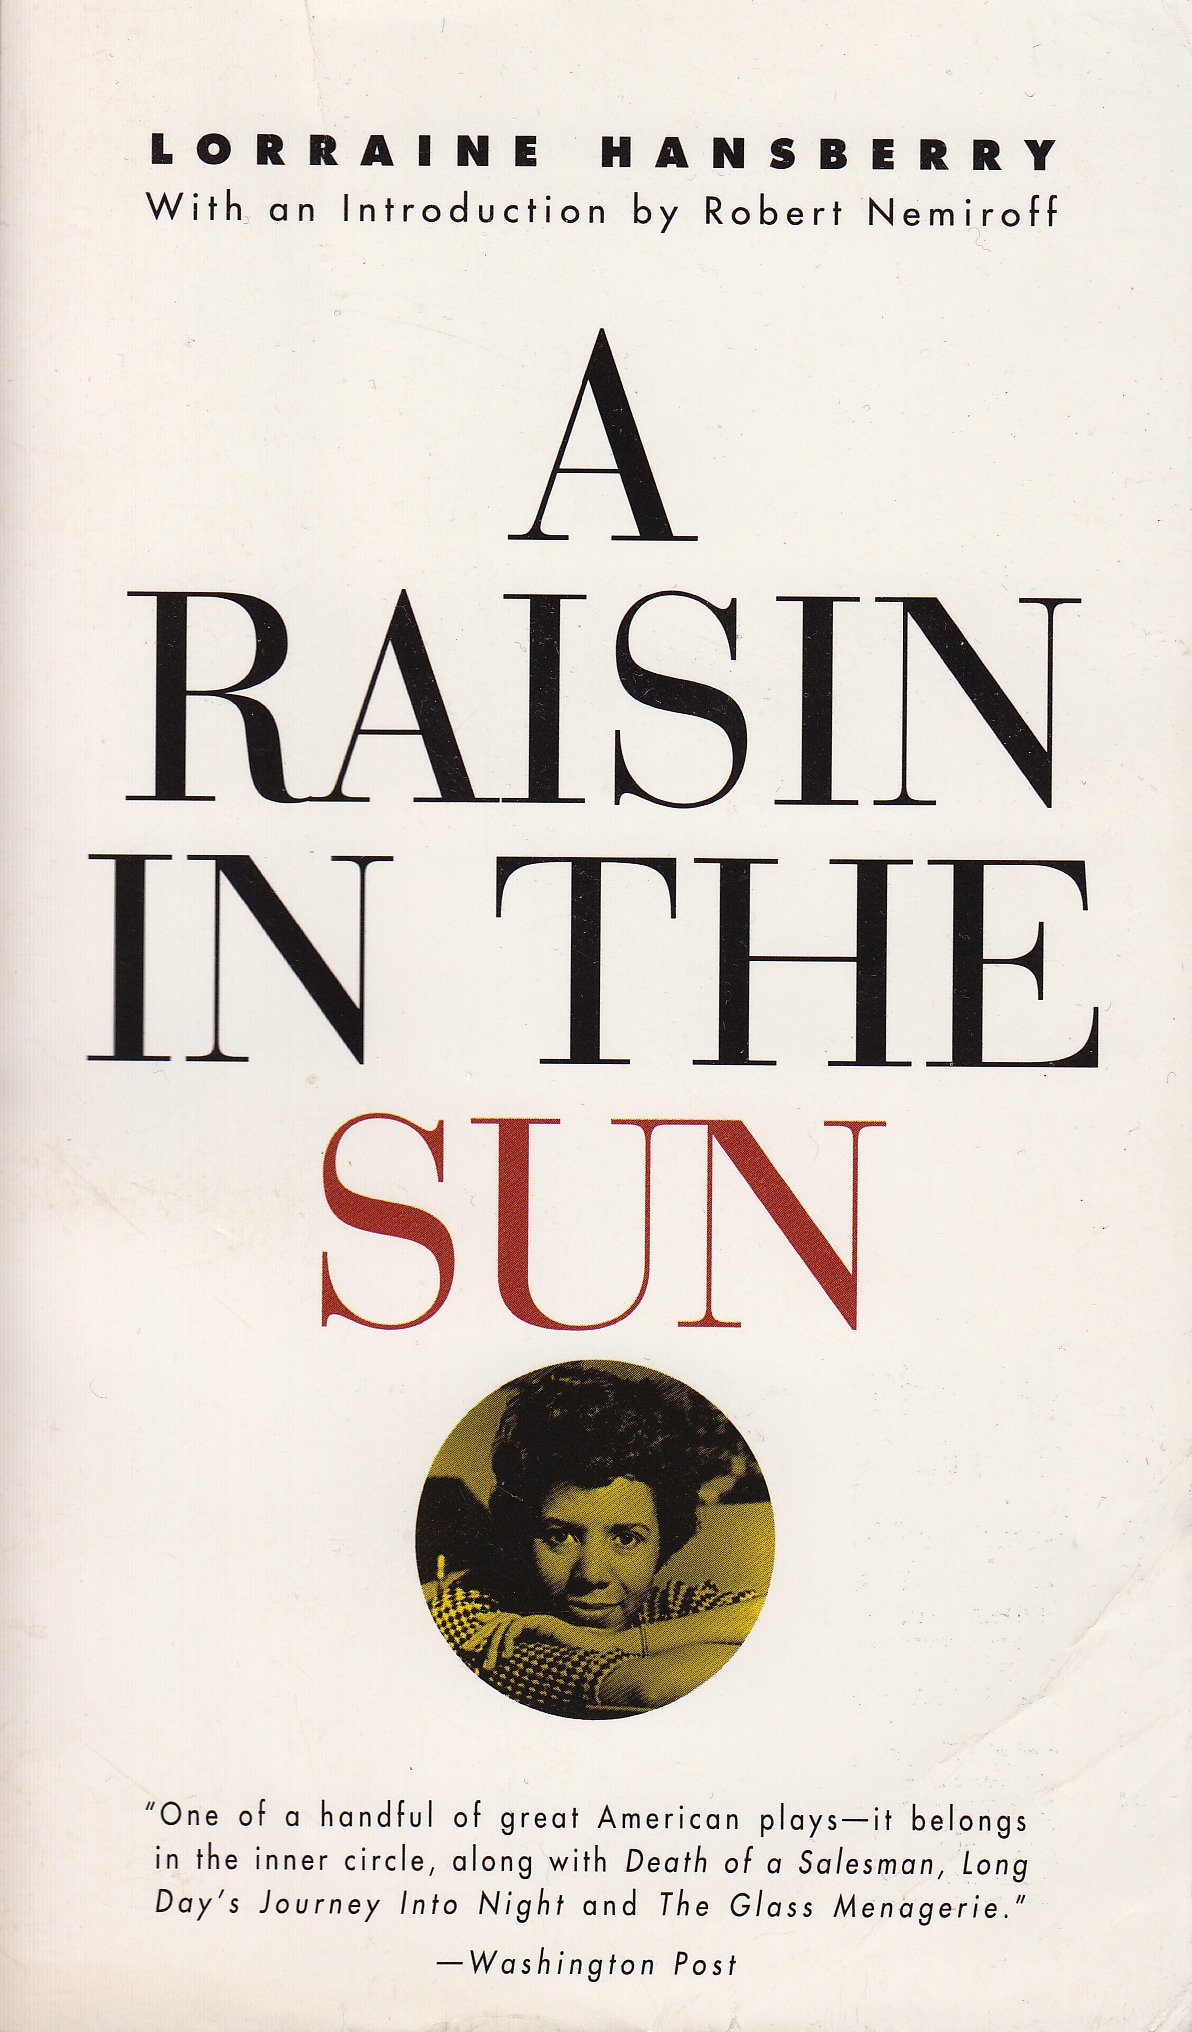 Happy birthday to the late great banned book author Lorraine Hansberry!  